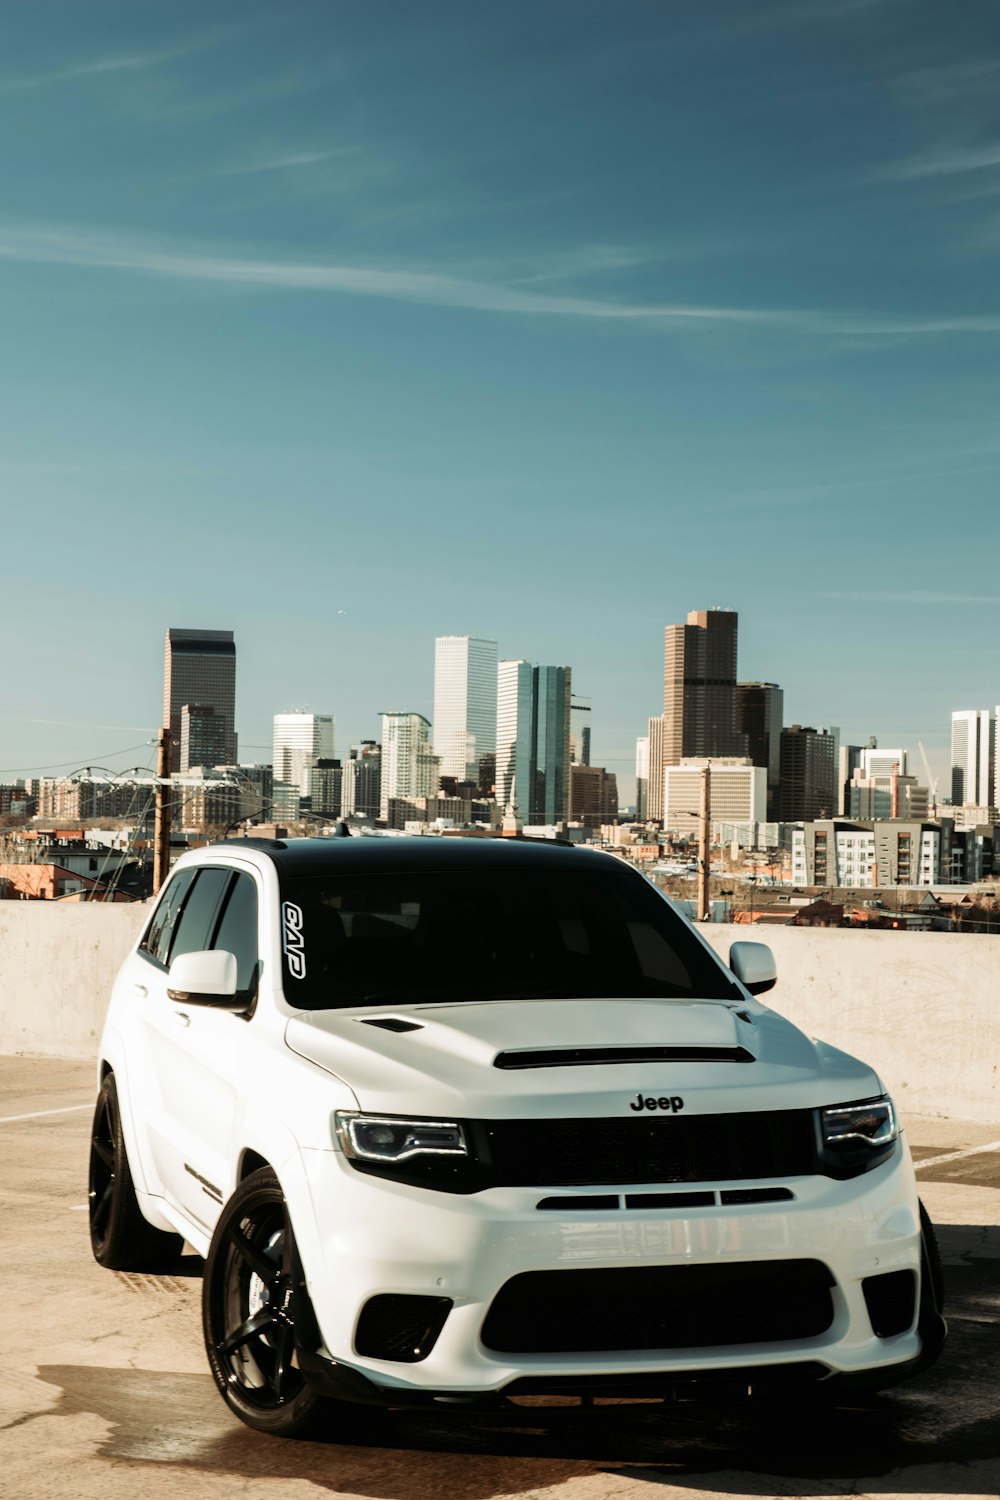 a white jeep parked in front of a city skyline